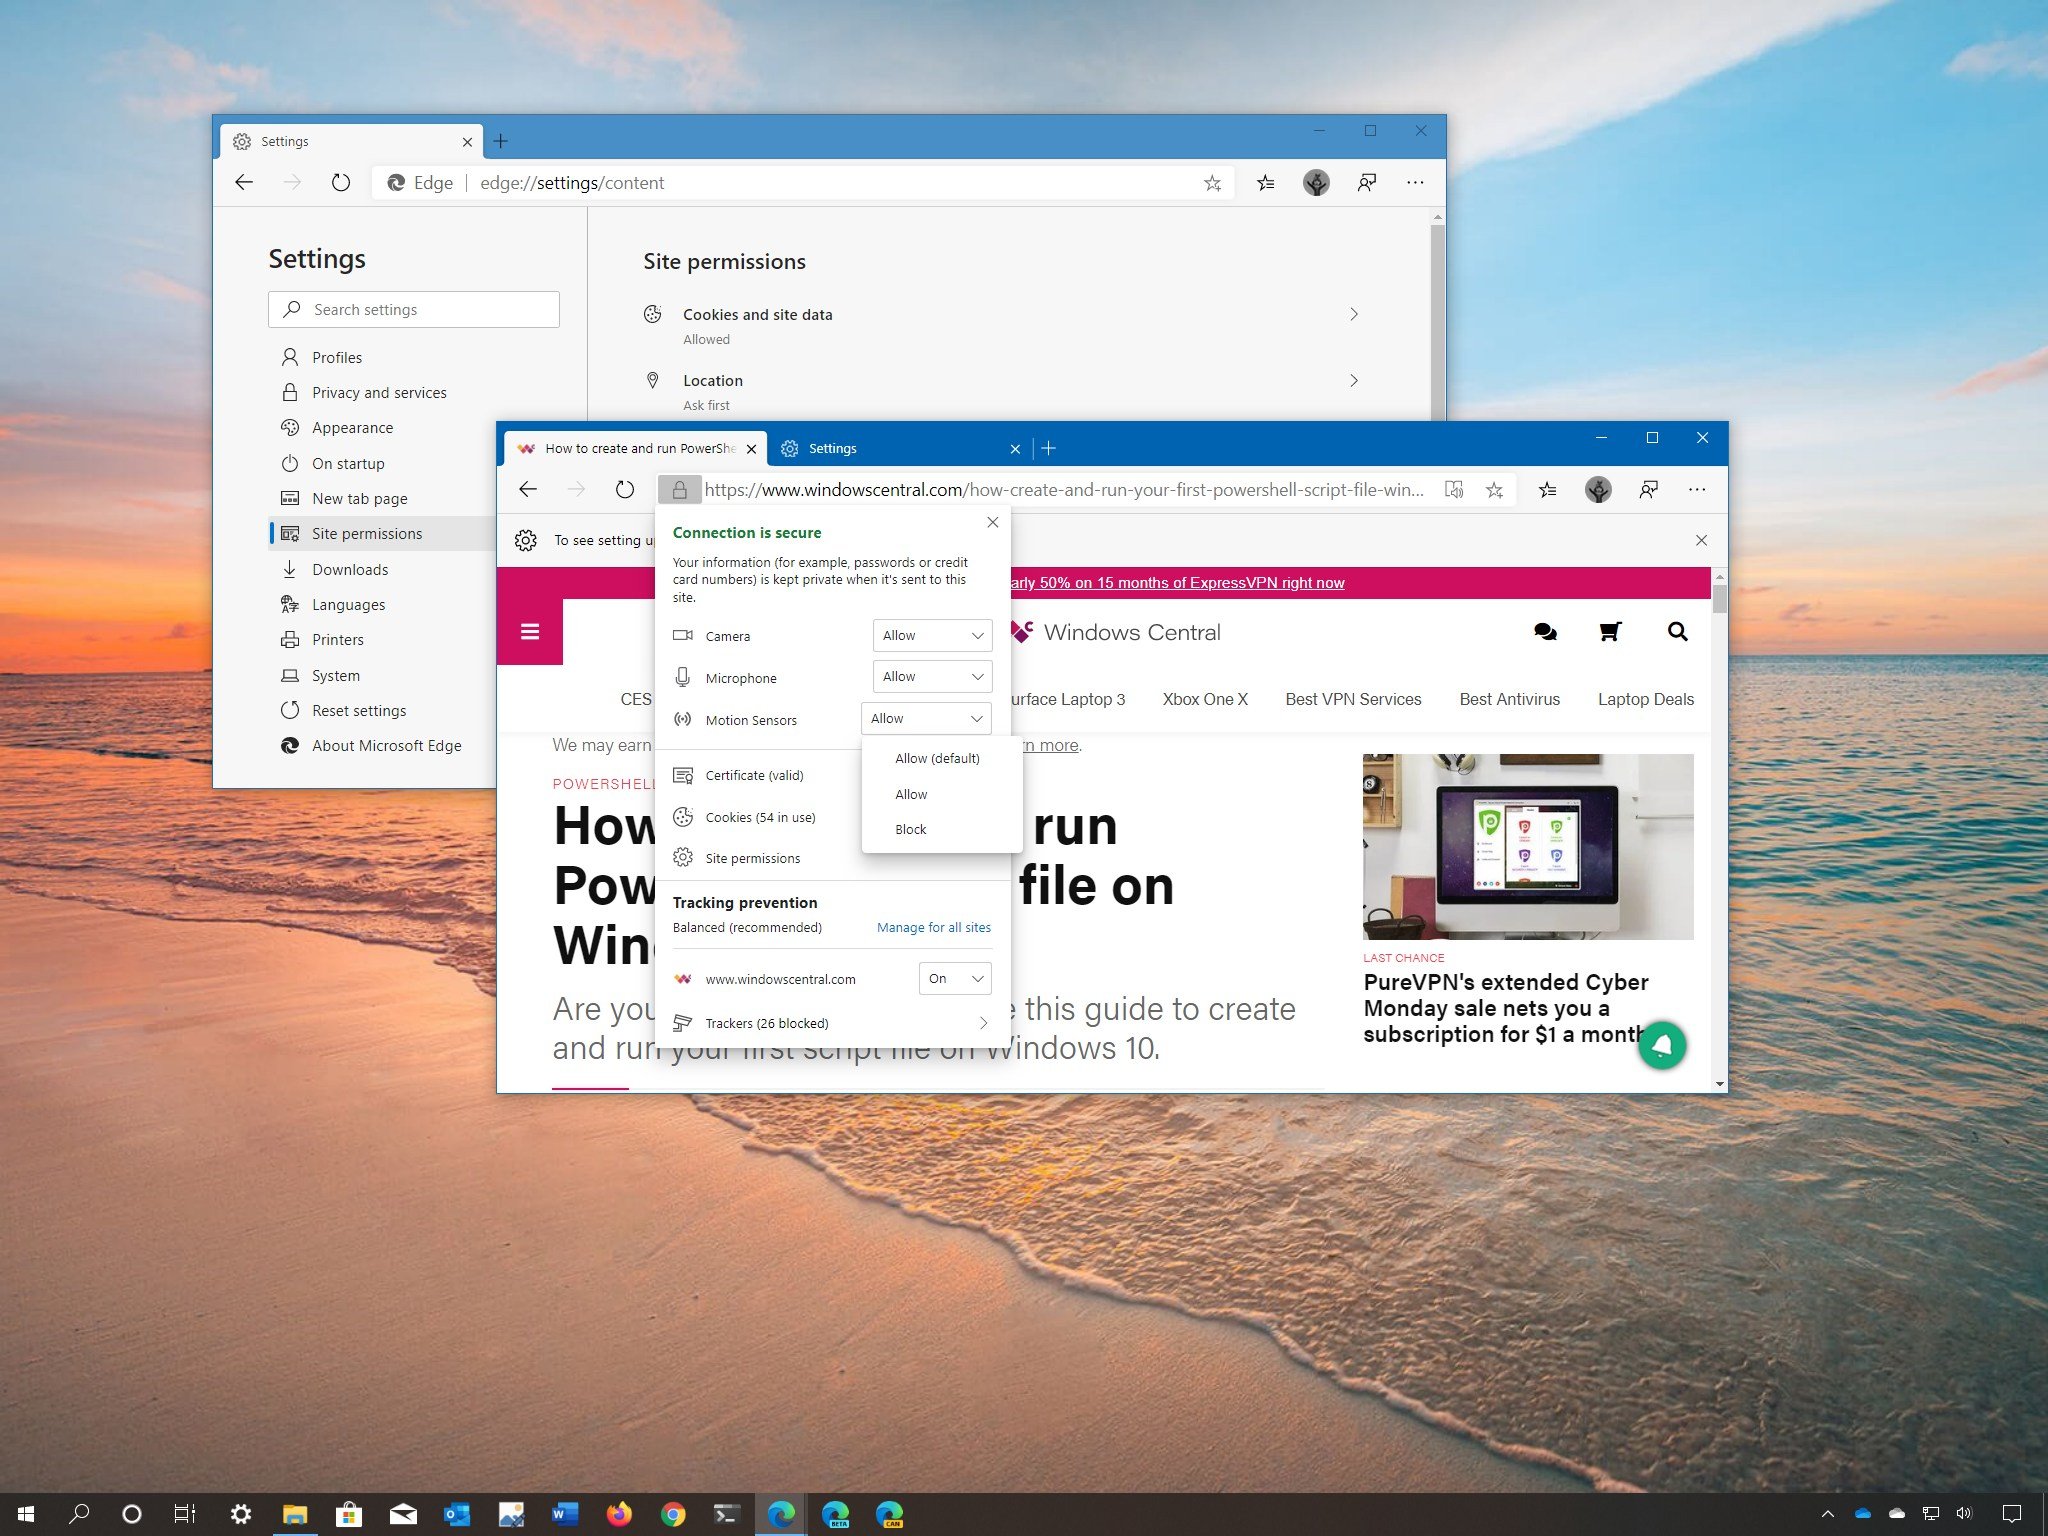 Enable Copilot in a managed Microsoft Edge browser